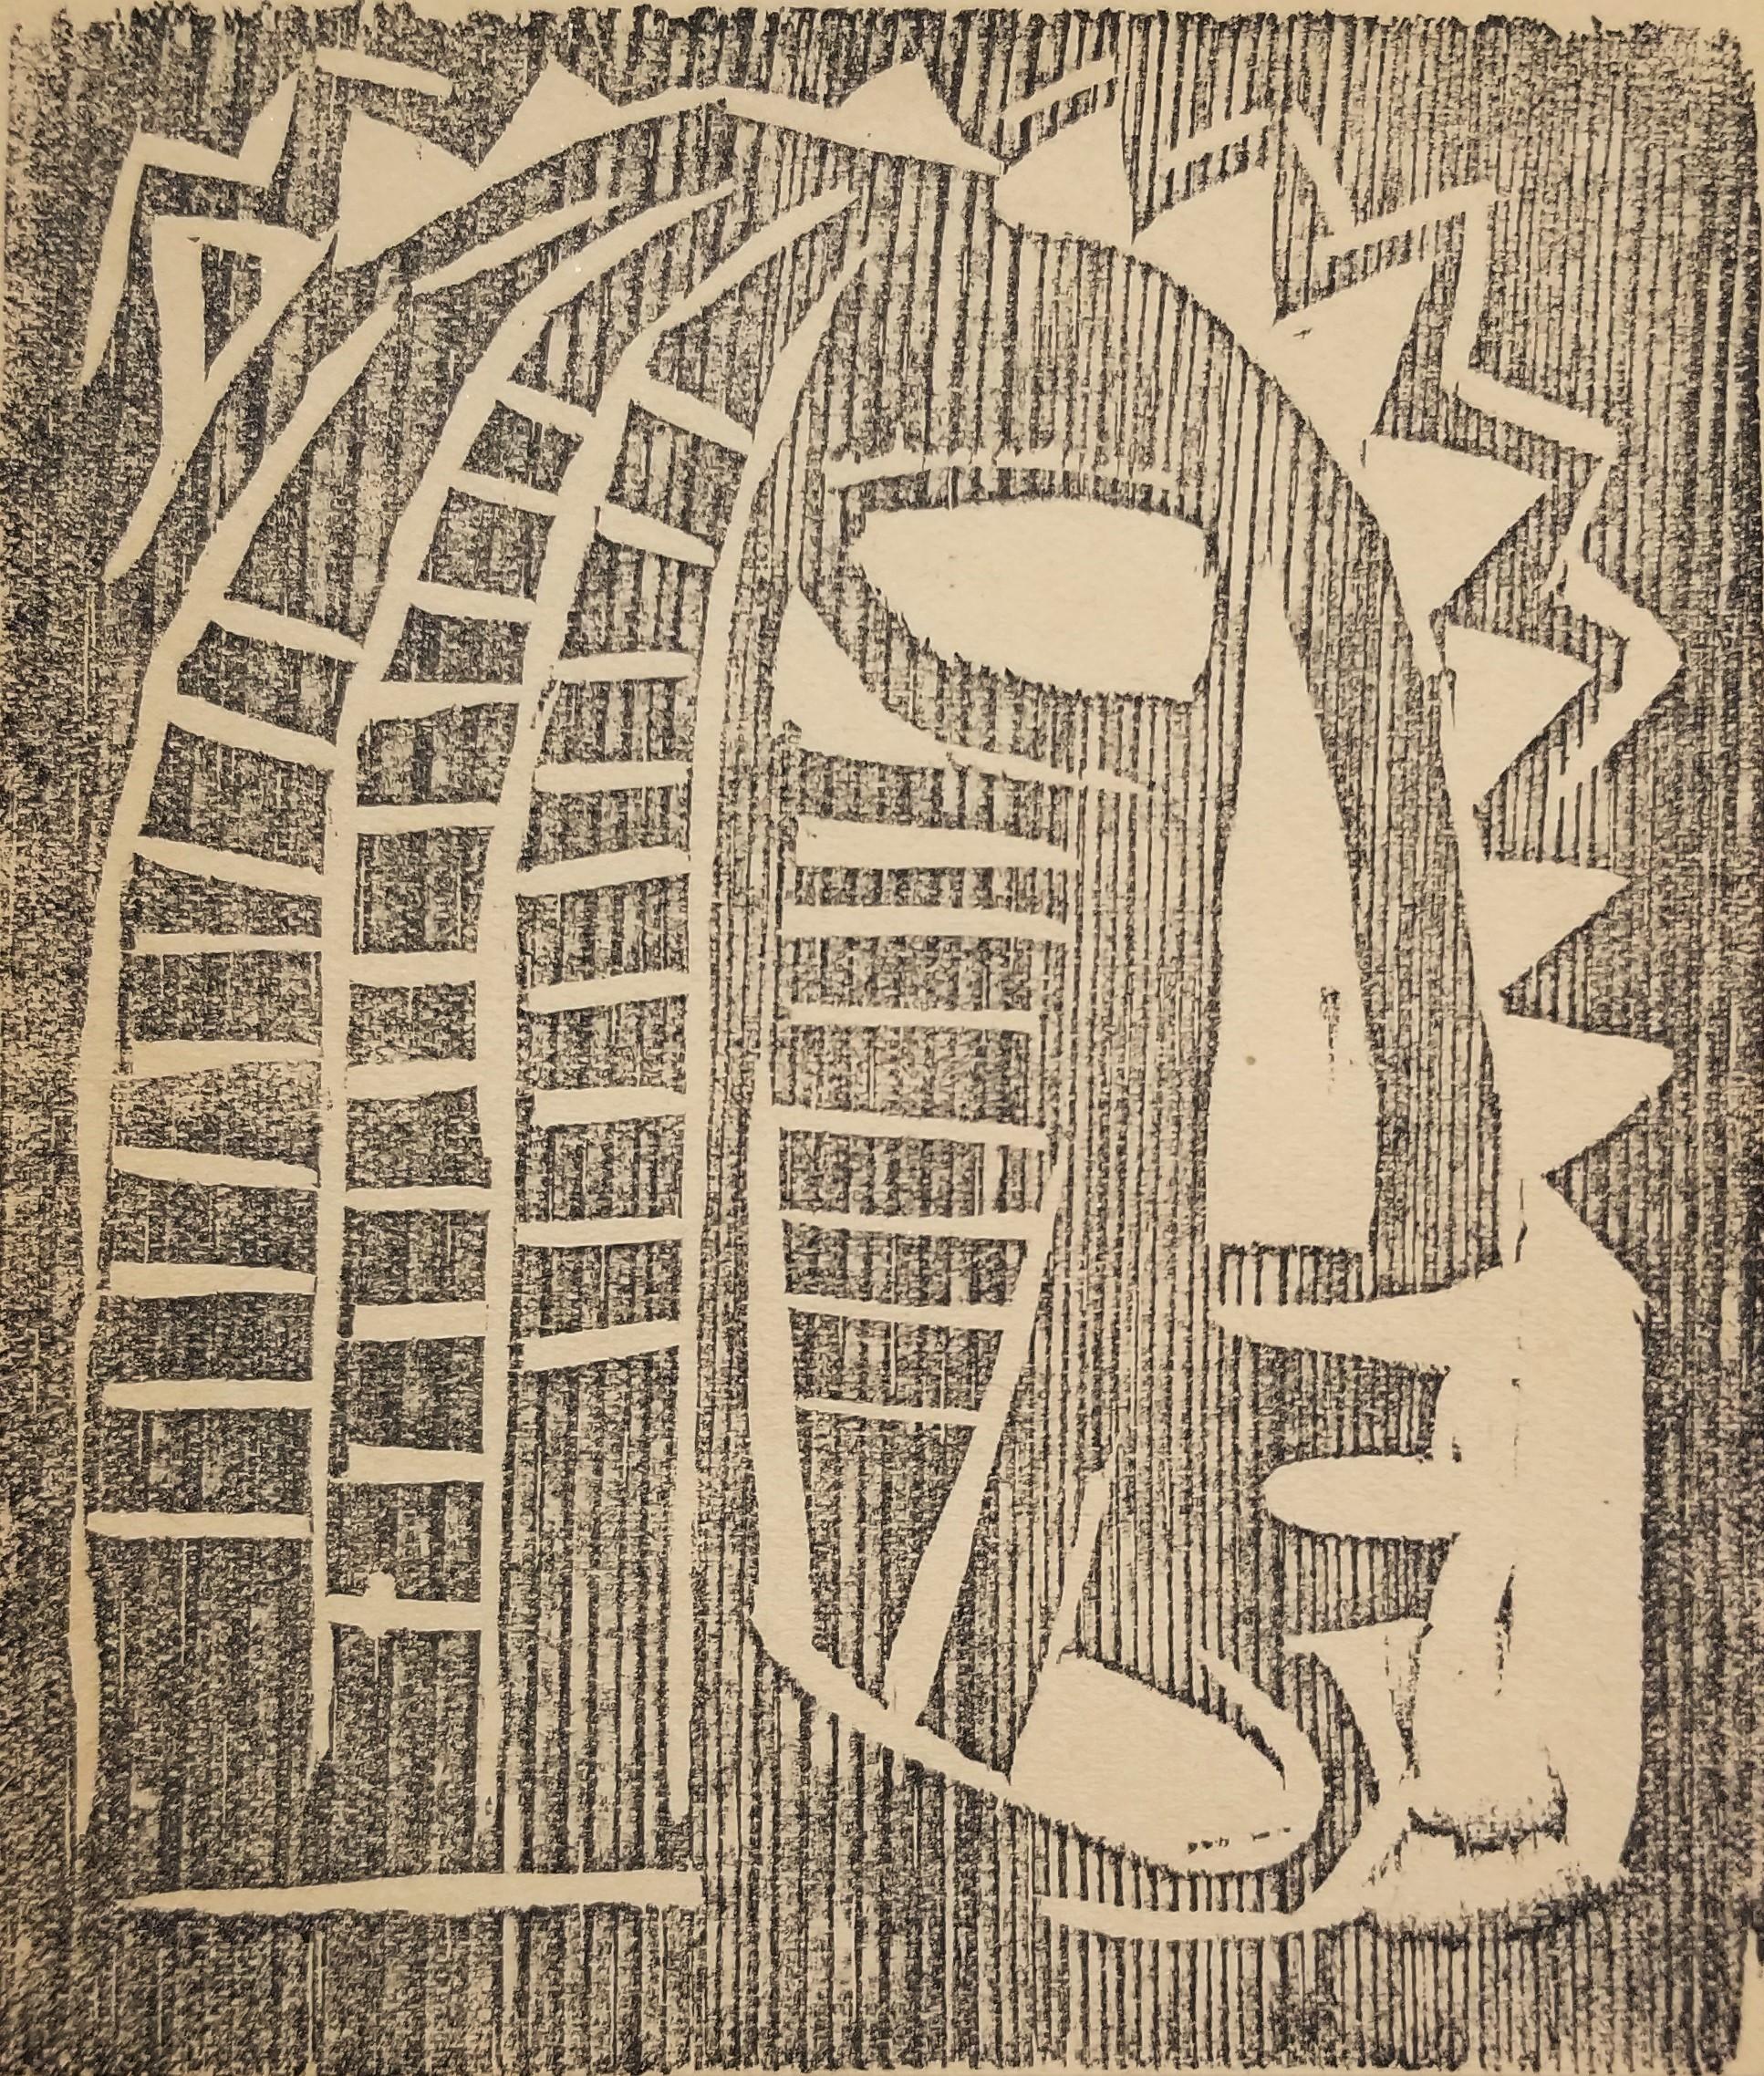 How do wood engravings differ from woodcuts?